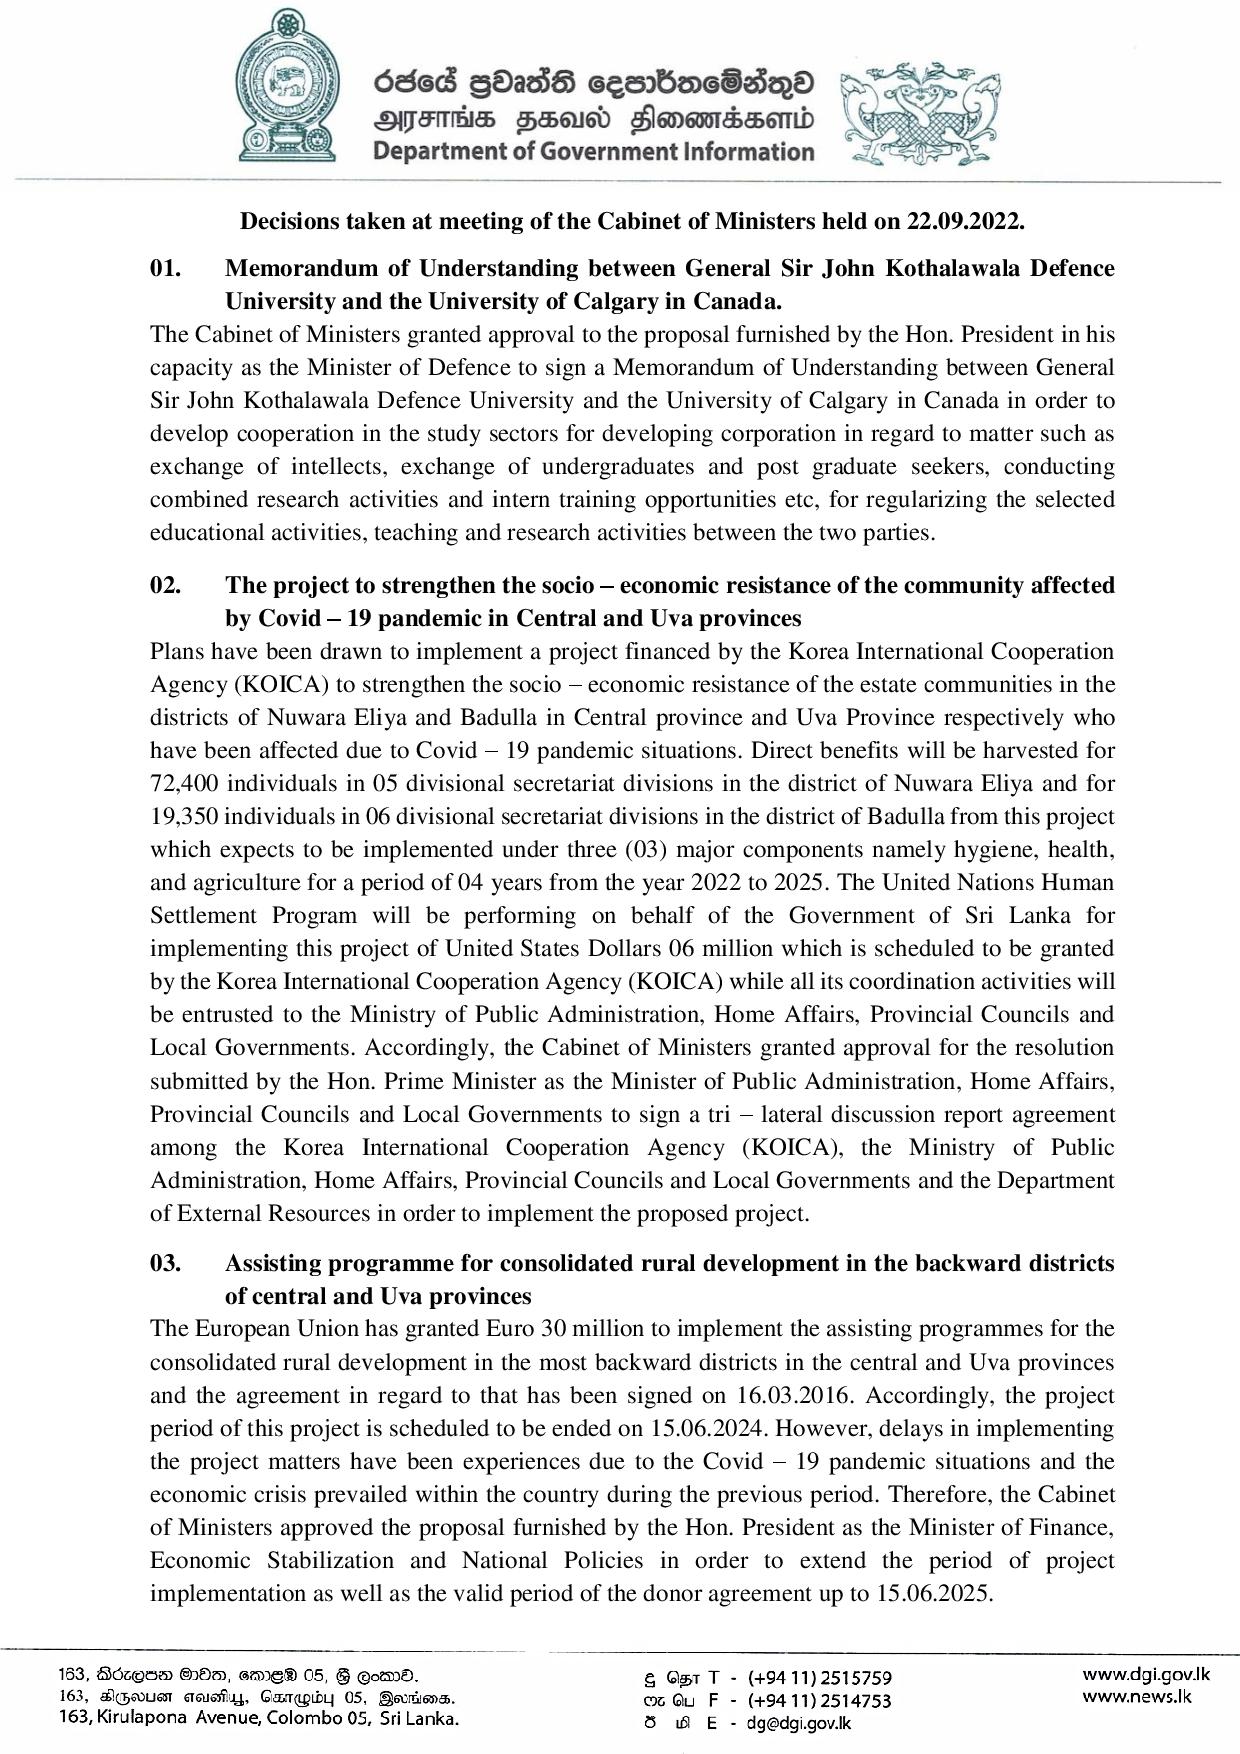 Cabinet Decisions on 22.09.2022 English page 001